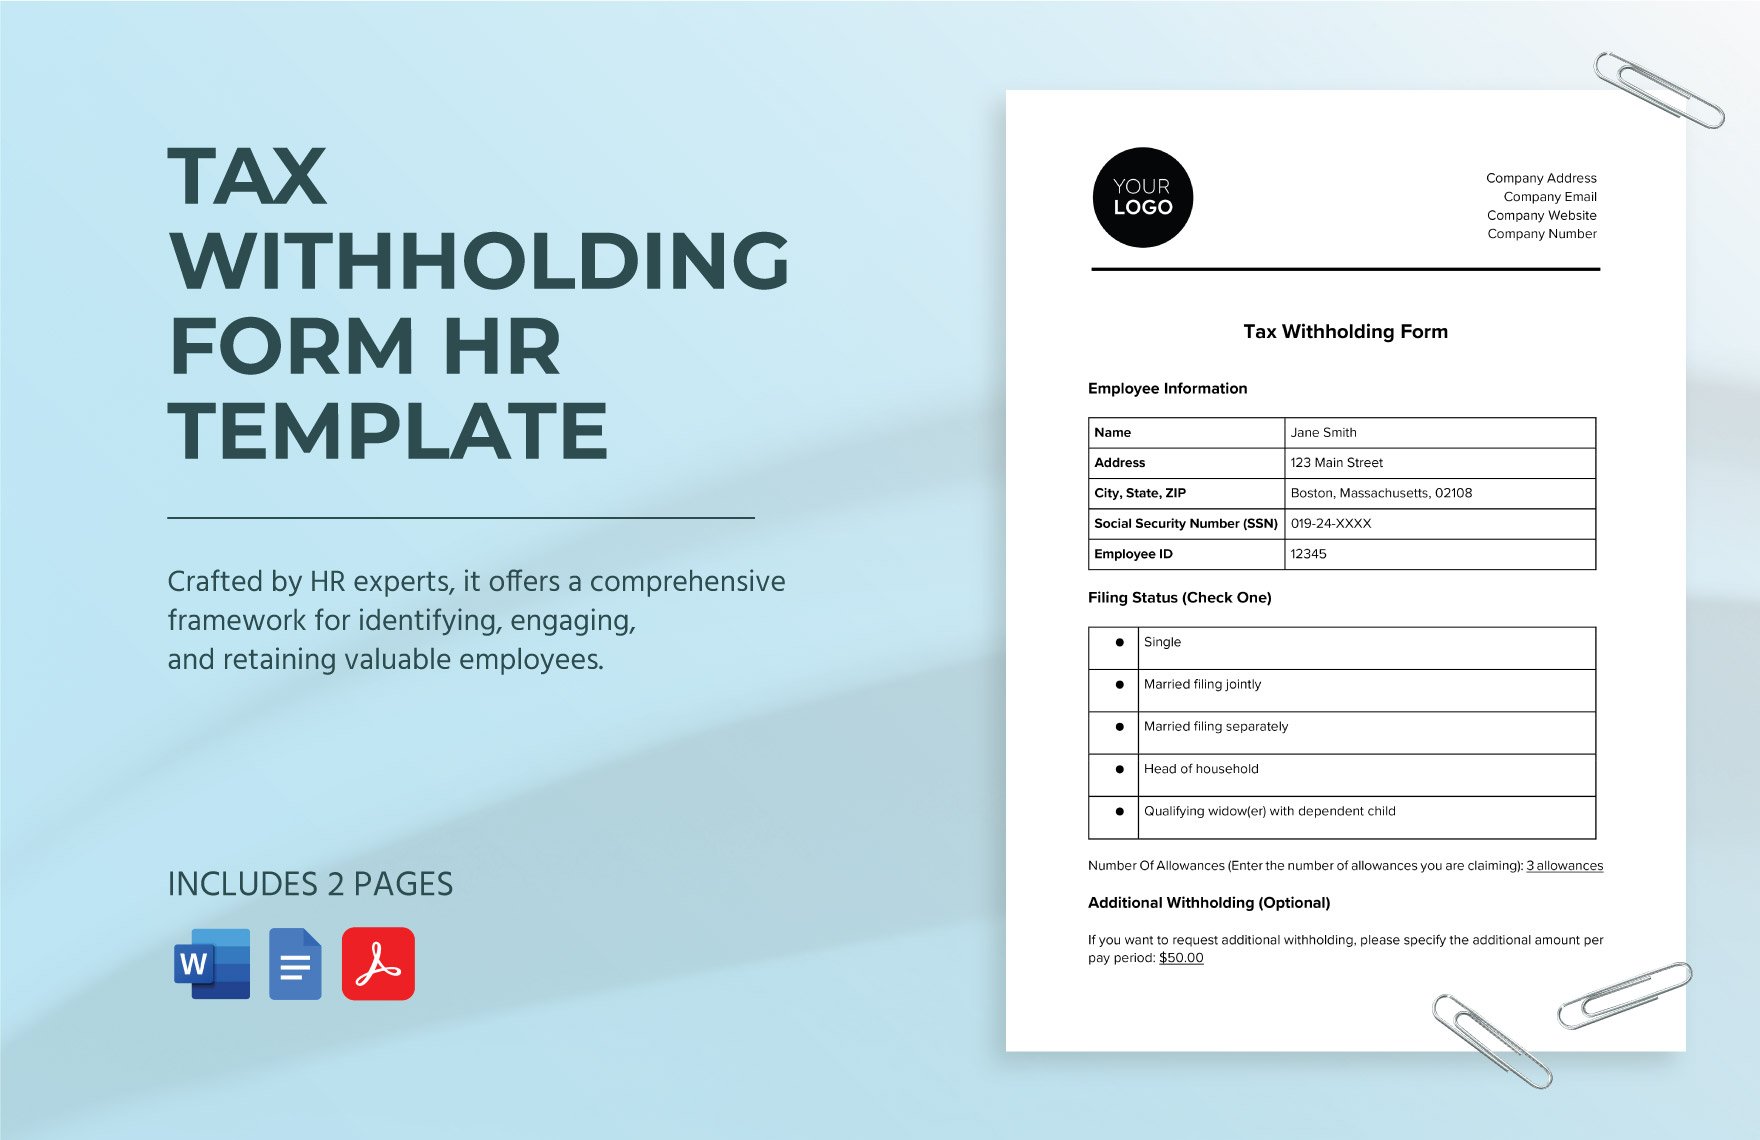 Tax Withholding Form HR Template